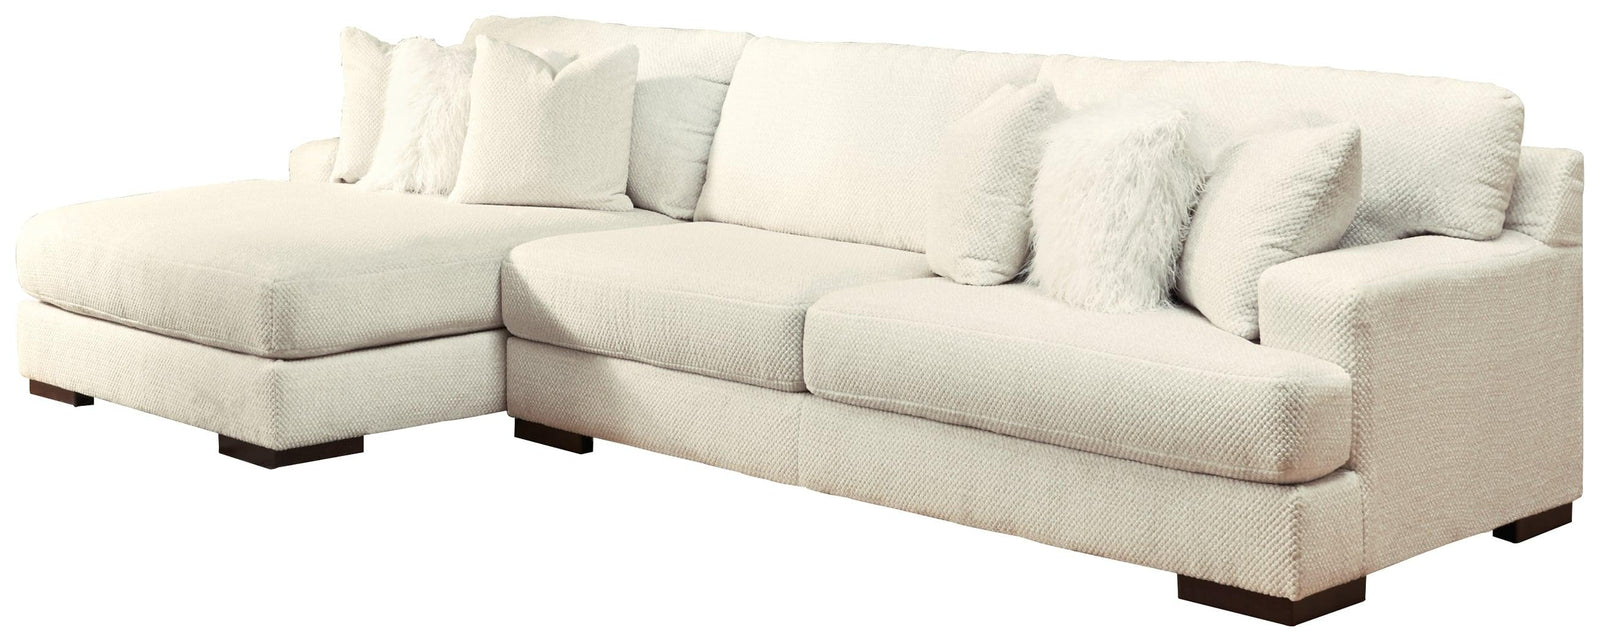 Zada Ivory 2-Piece Sectional With Chaise - Ella Furniture